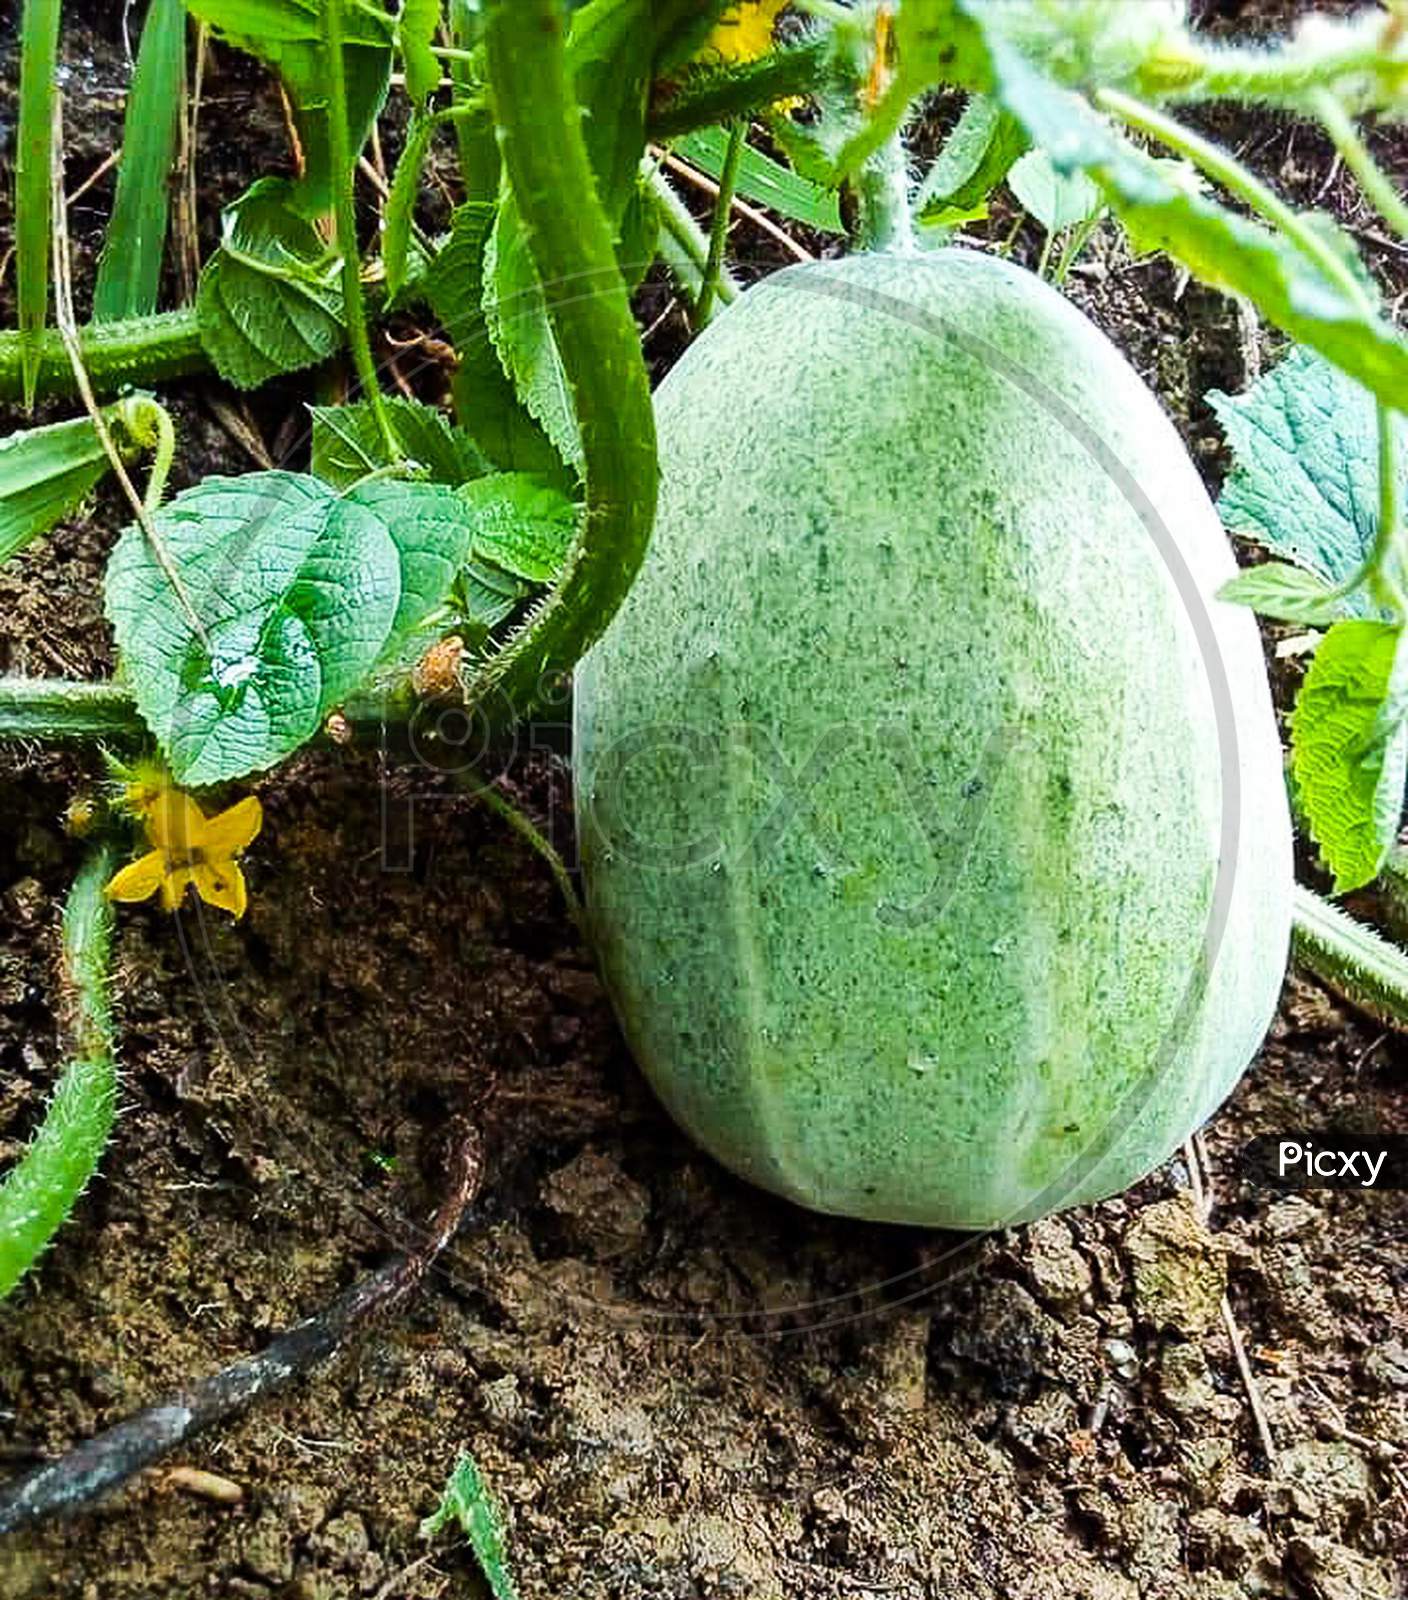 Cucumber is safe, chemicals, villagers planted in nature.